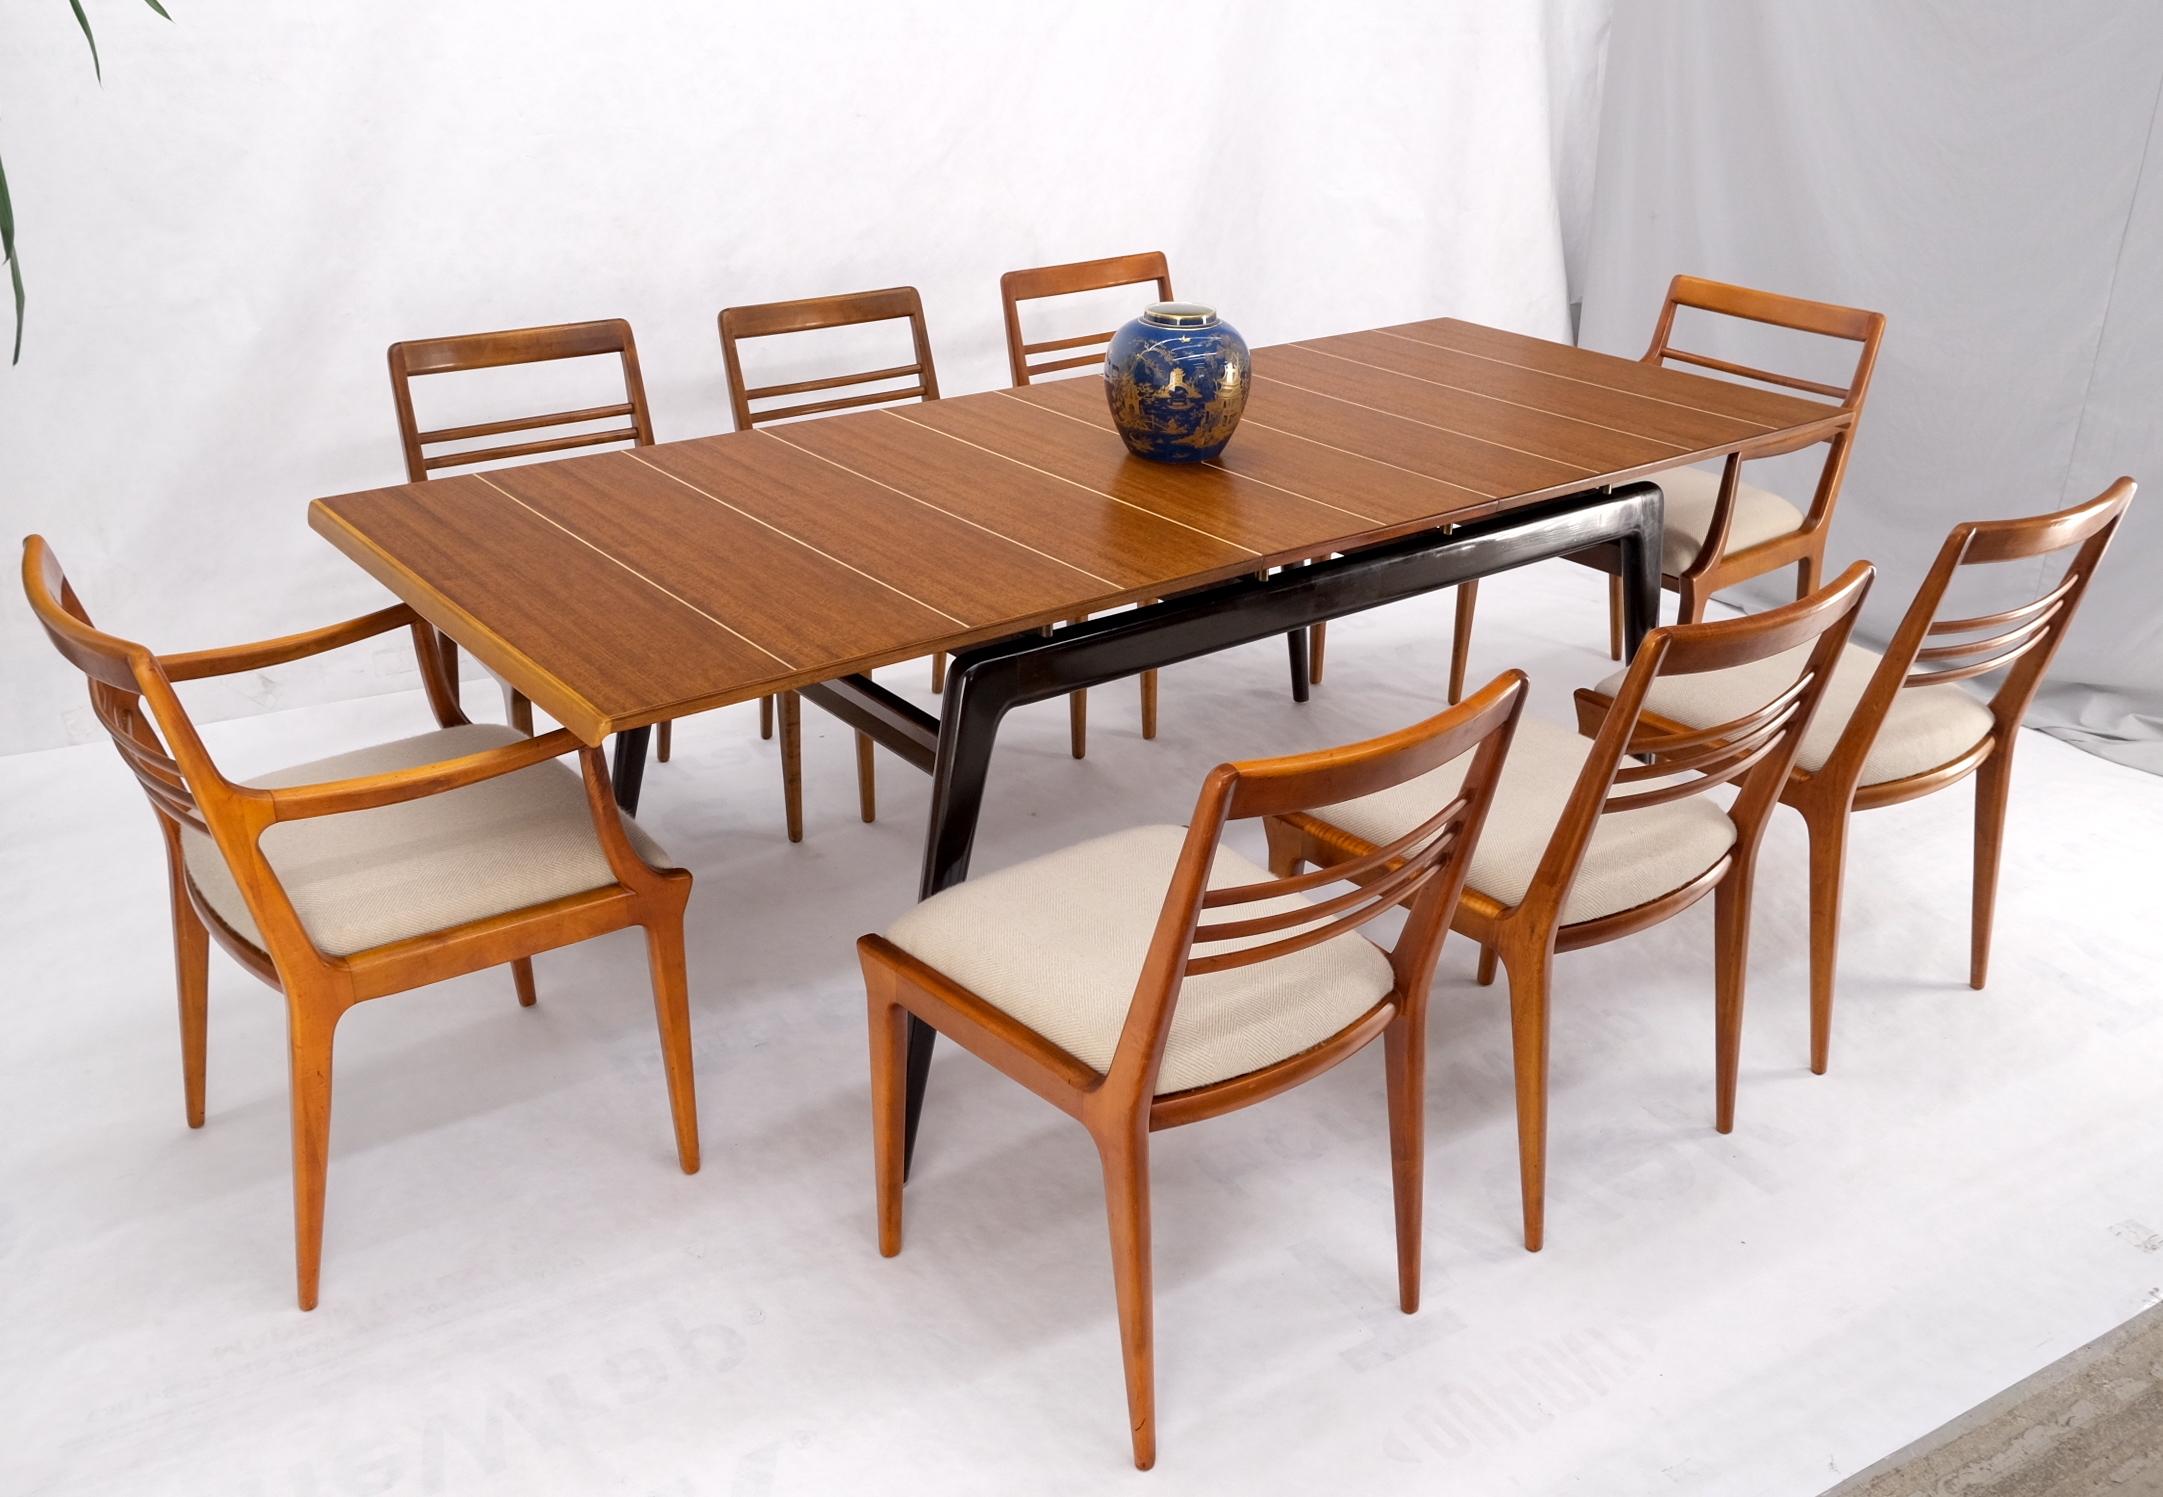 Italian Mid-Century Modern Dining Table 8 Chairs Set New Linen Upholstery Seats For Sale 12